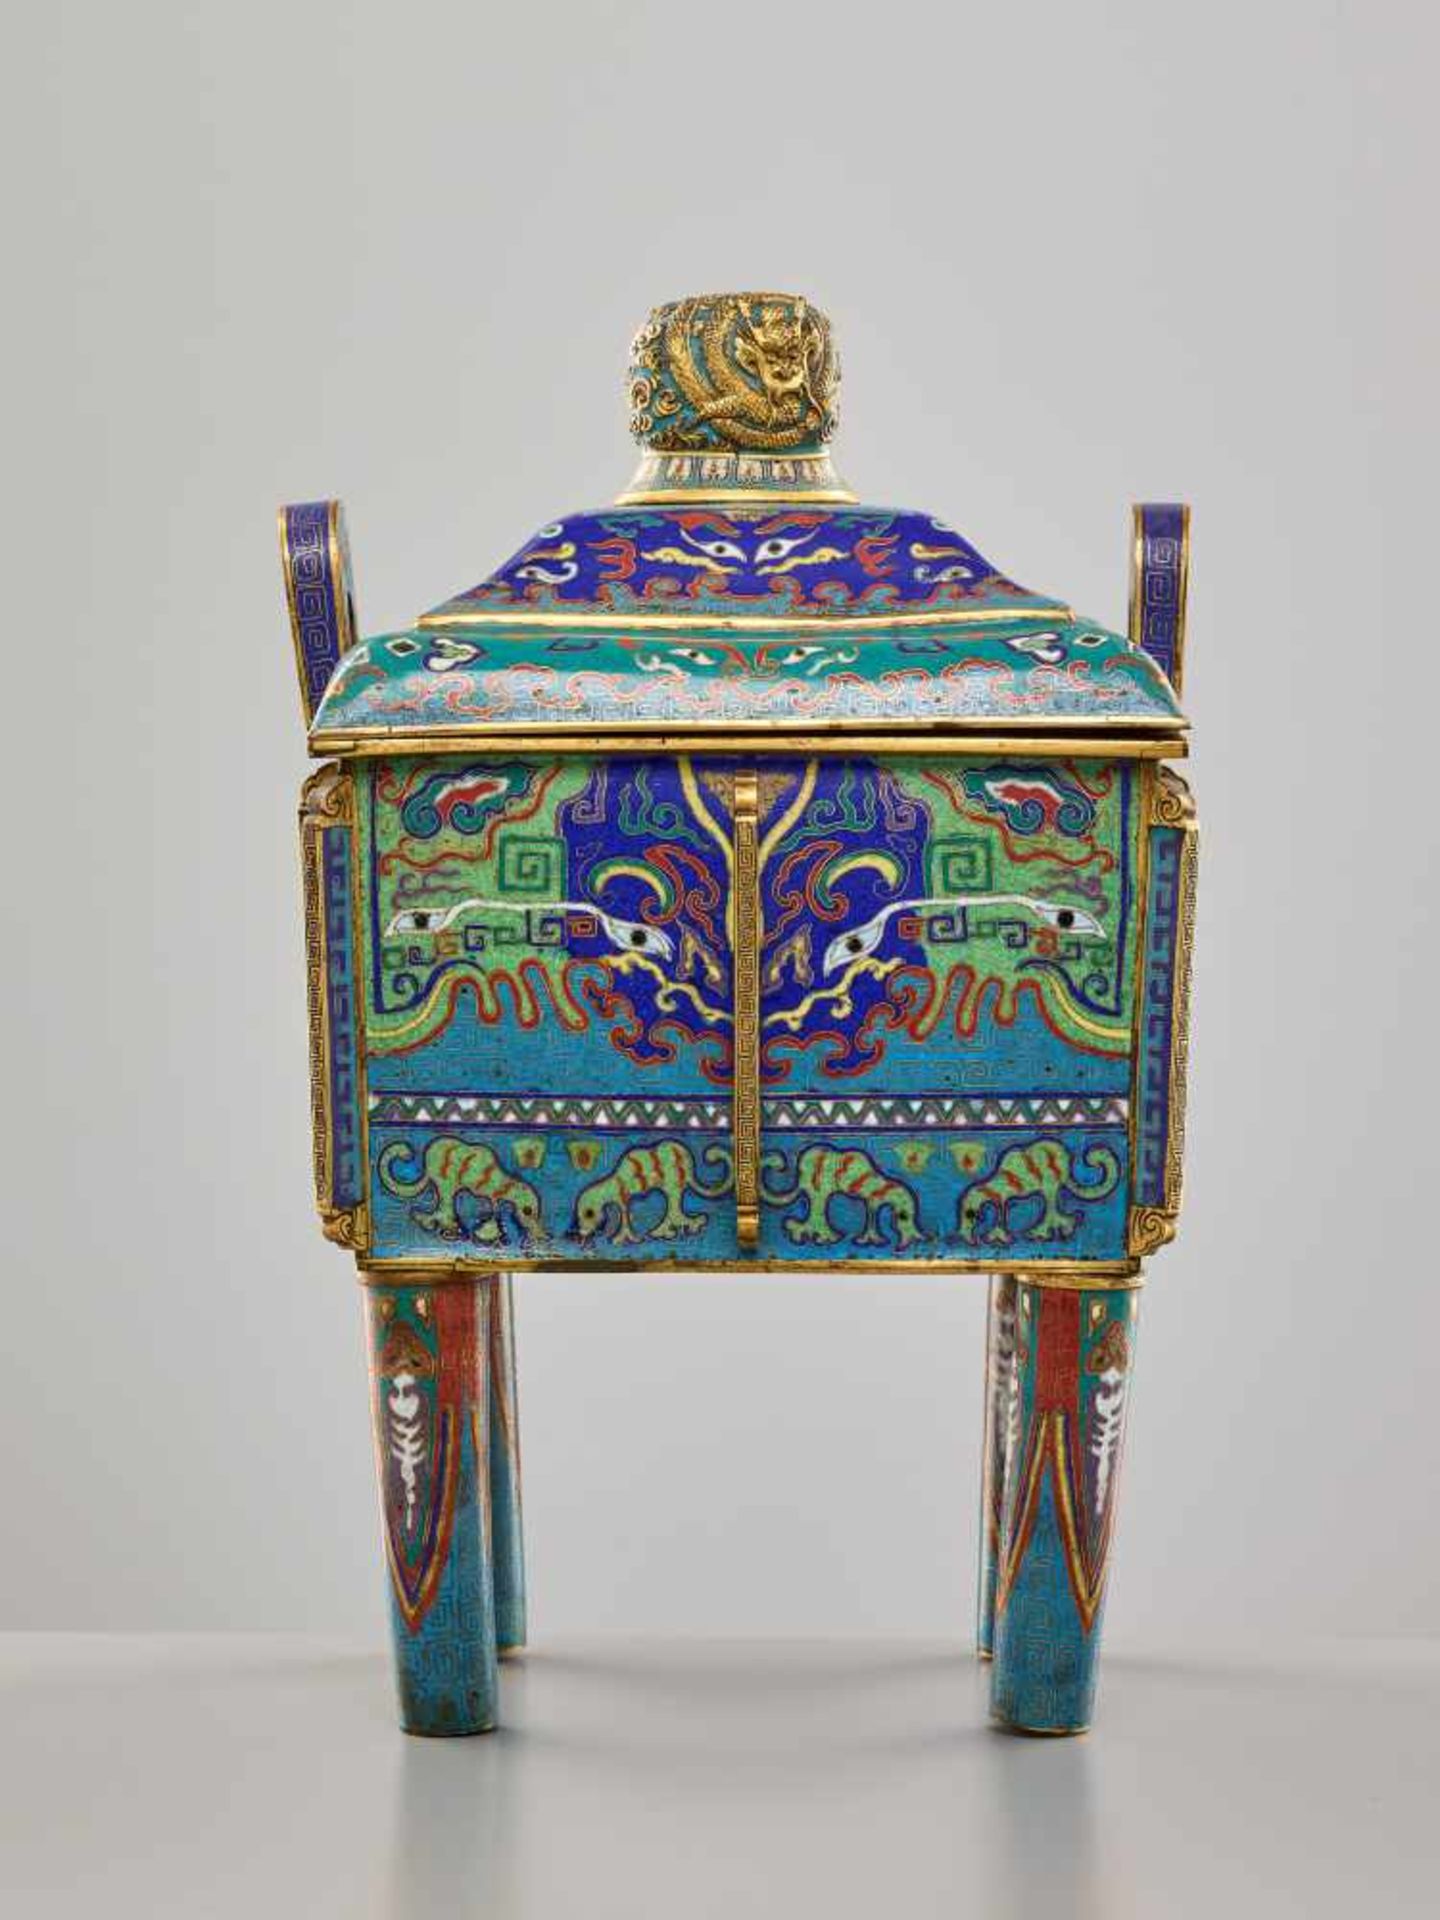 A CLOISONNÉ ENAMEL CENSER AND COVER, FANGDING, QING DYNASTYThe massively cast bronze vessel with - Image 4 of 15